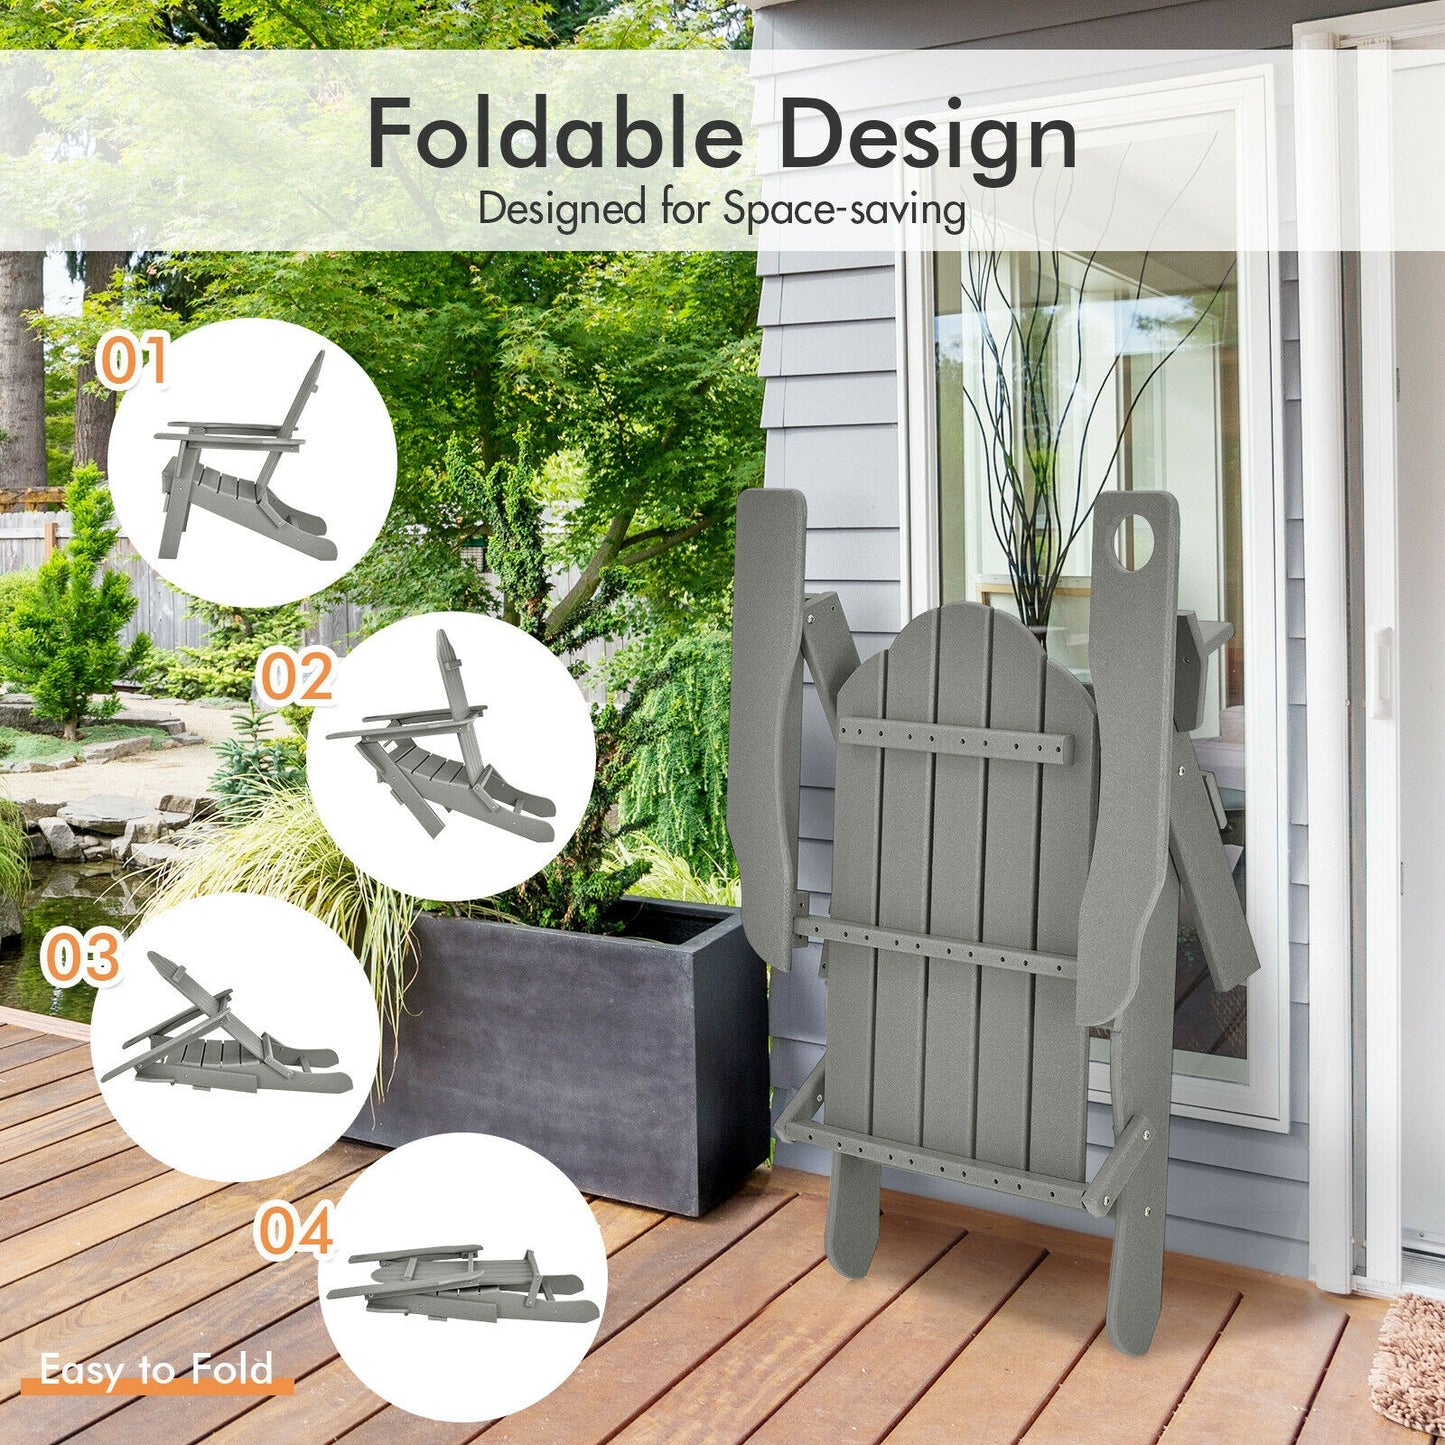 Foldable Weather Resistant Patio Chair with Built-in Cup Holder-Gray